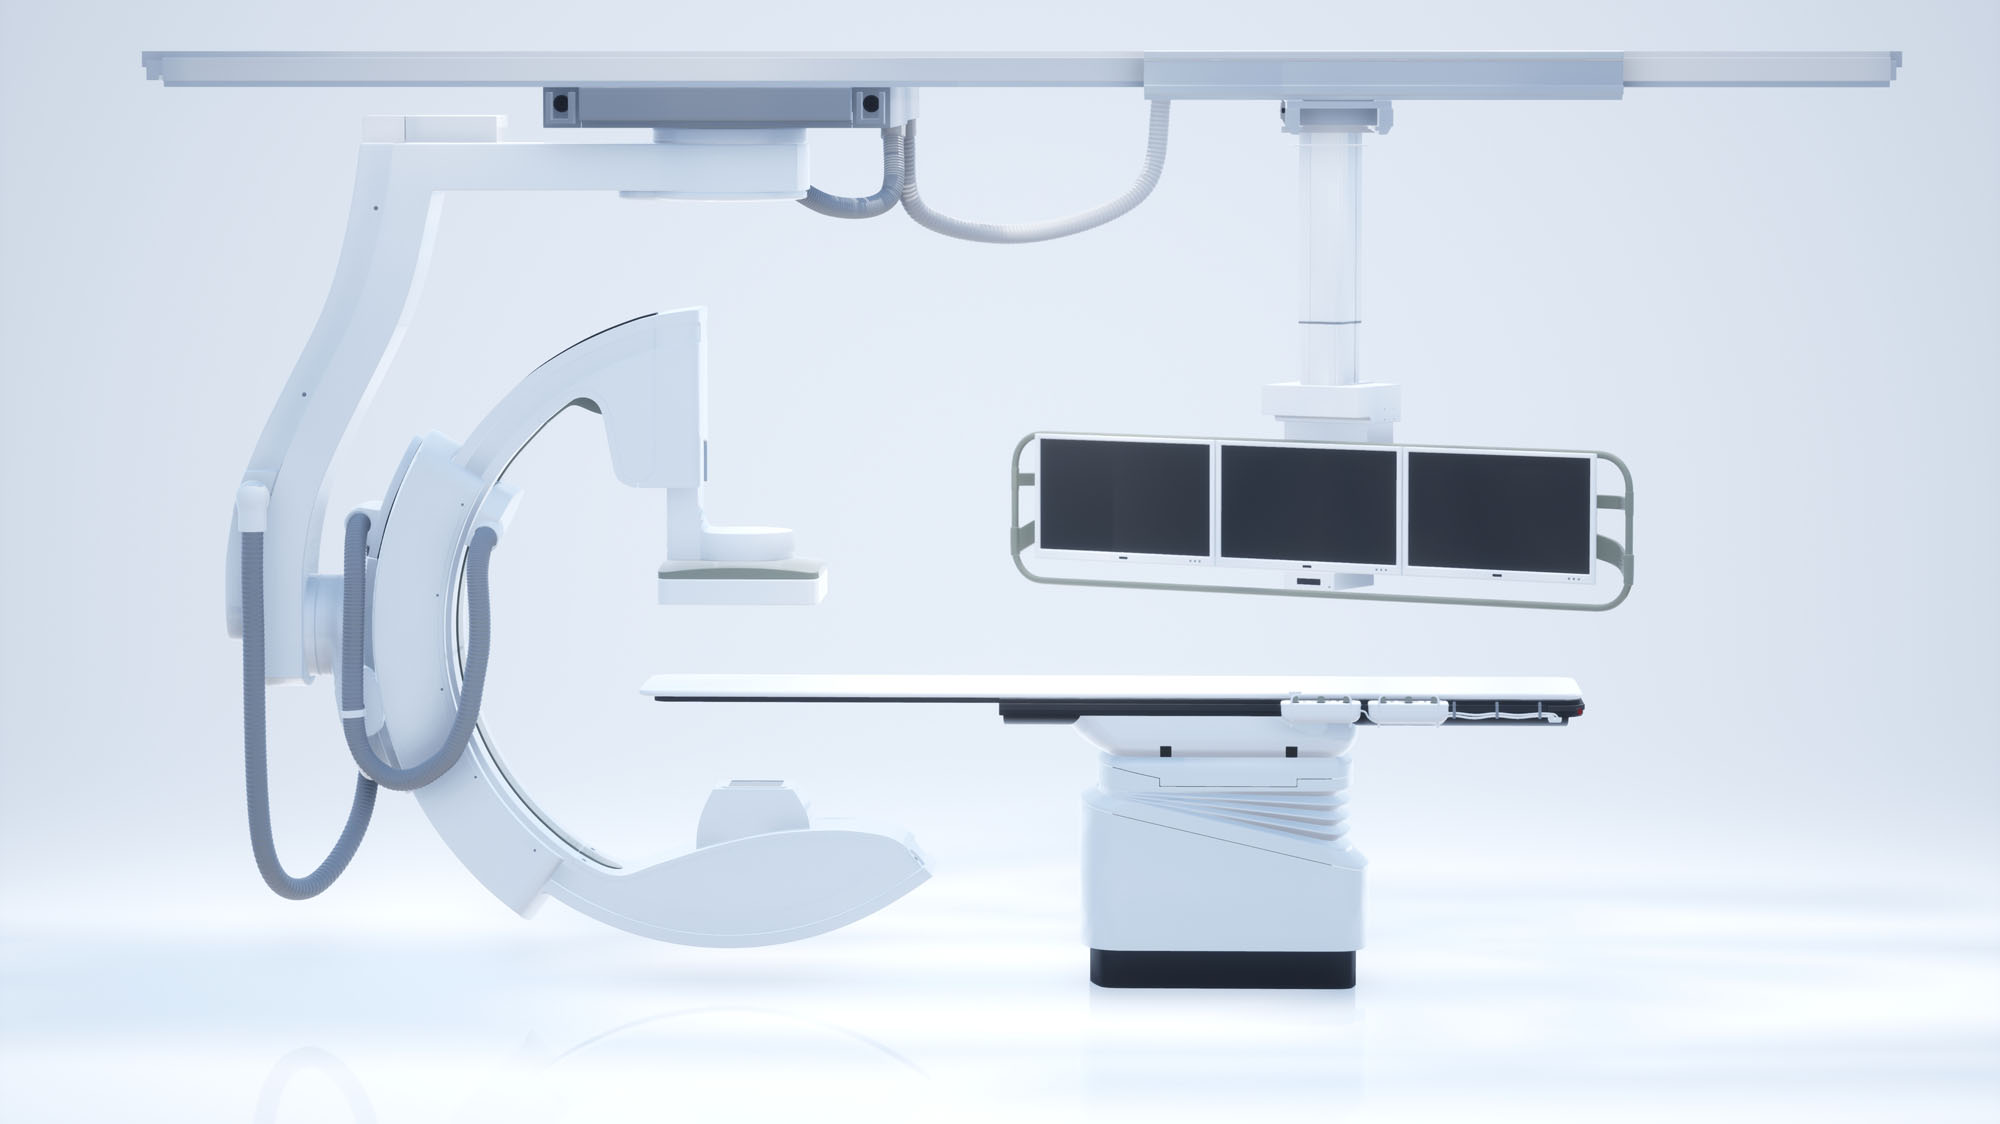 Interventional X-ray System